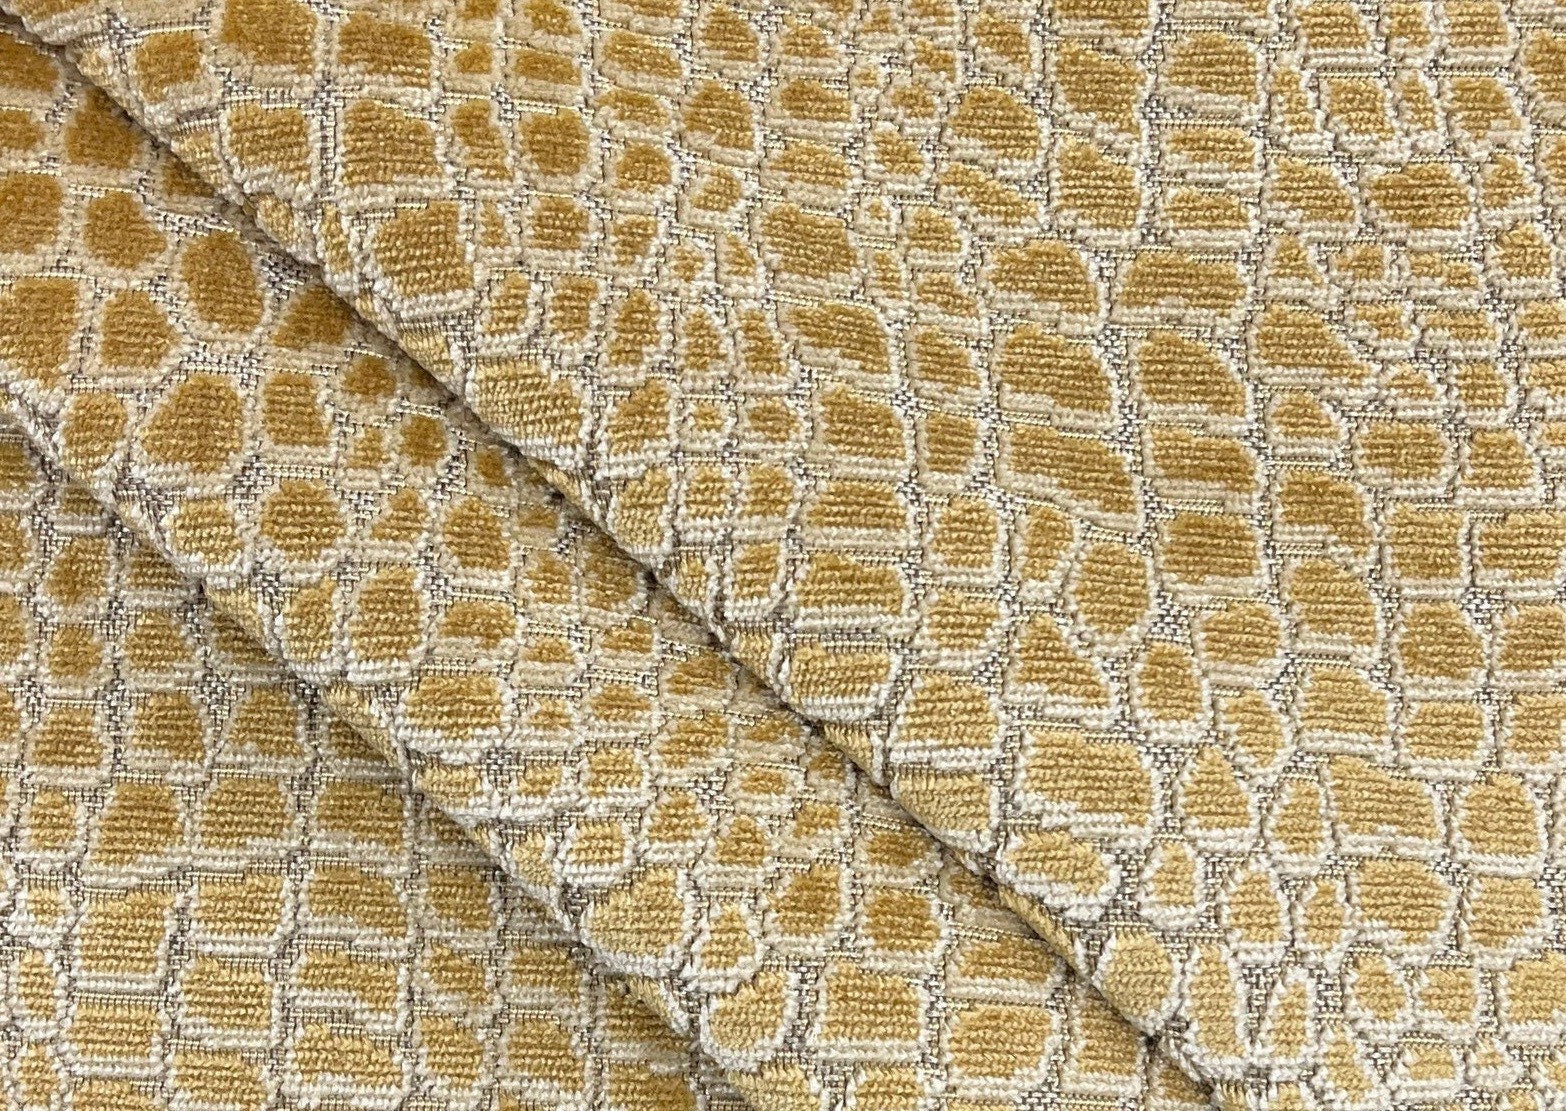 54 Dark Gold Crocco Faux Leather Fabric - By The Yard [DG-CROC] - $14.99 :  , Burlap for Wedding and Special Events